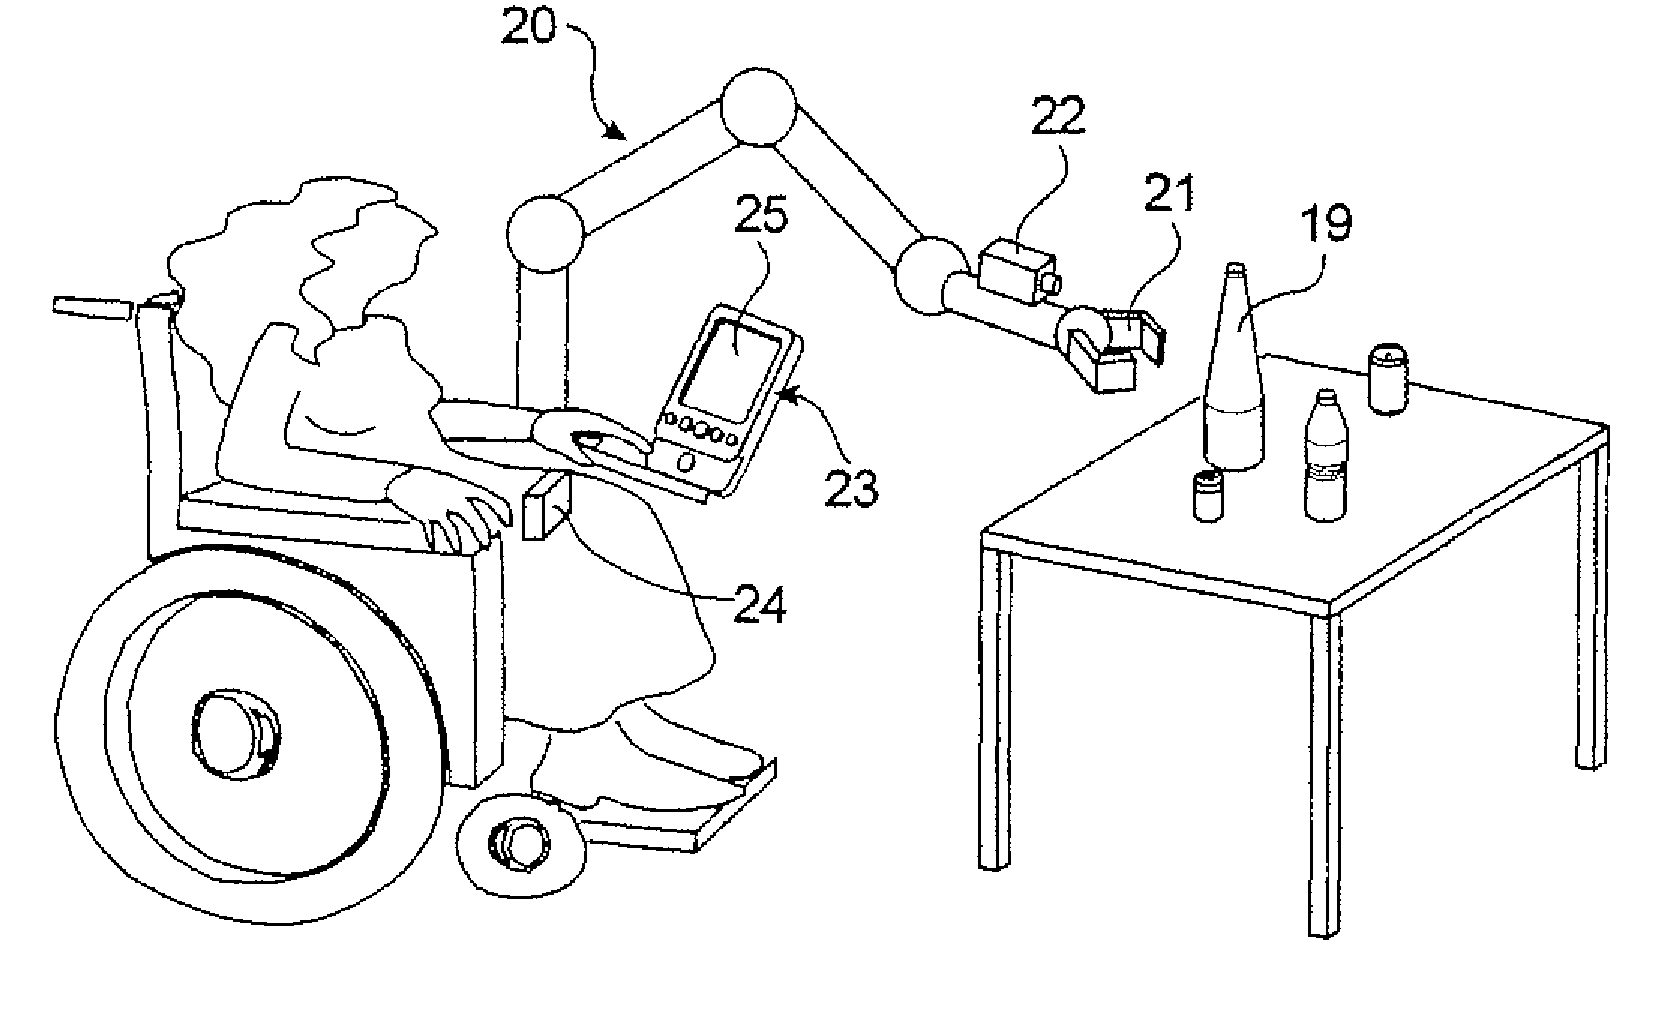 Intelligent interface device for grasping of an object by a manipulating robot and method of implementing this device